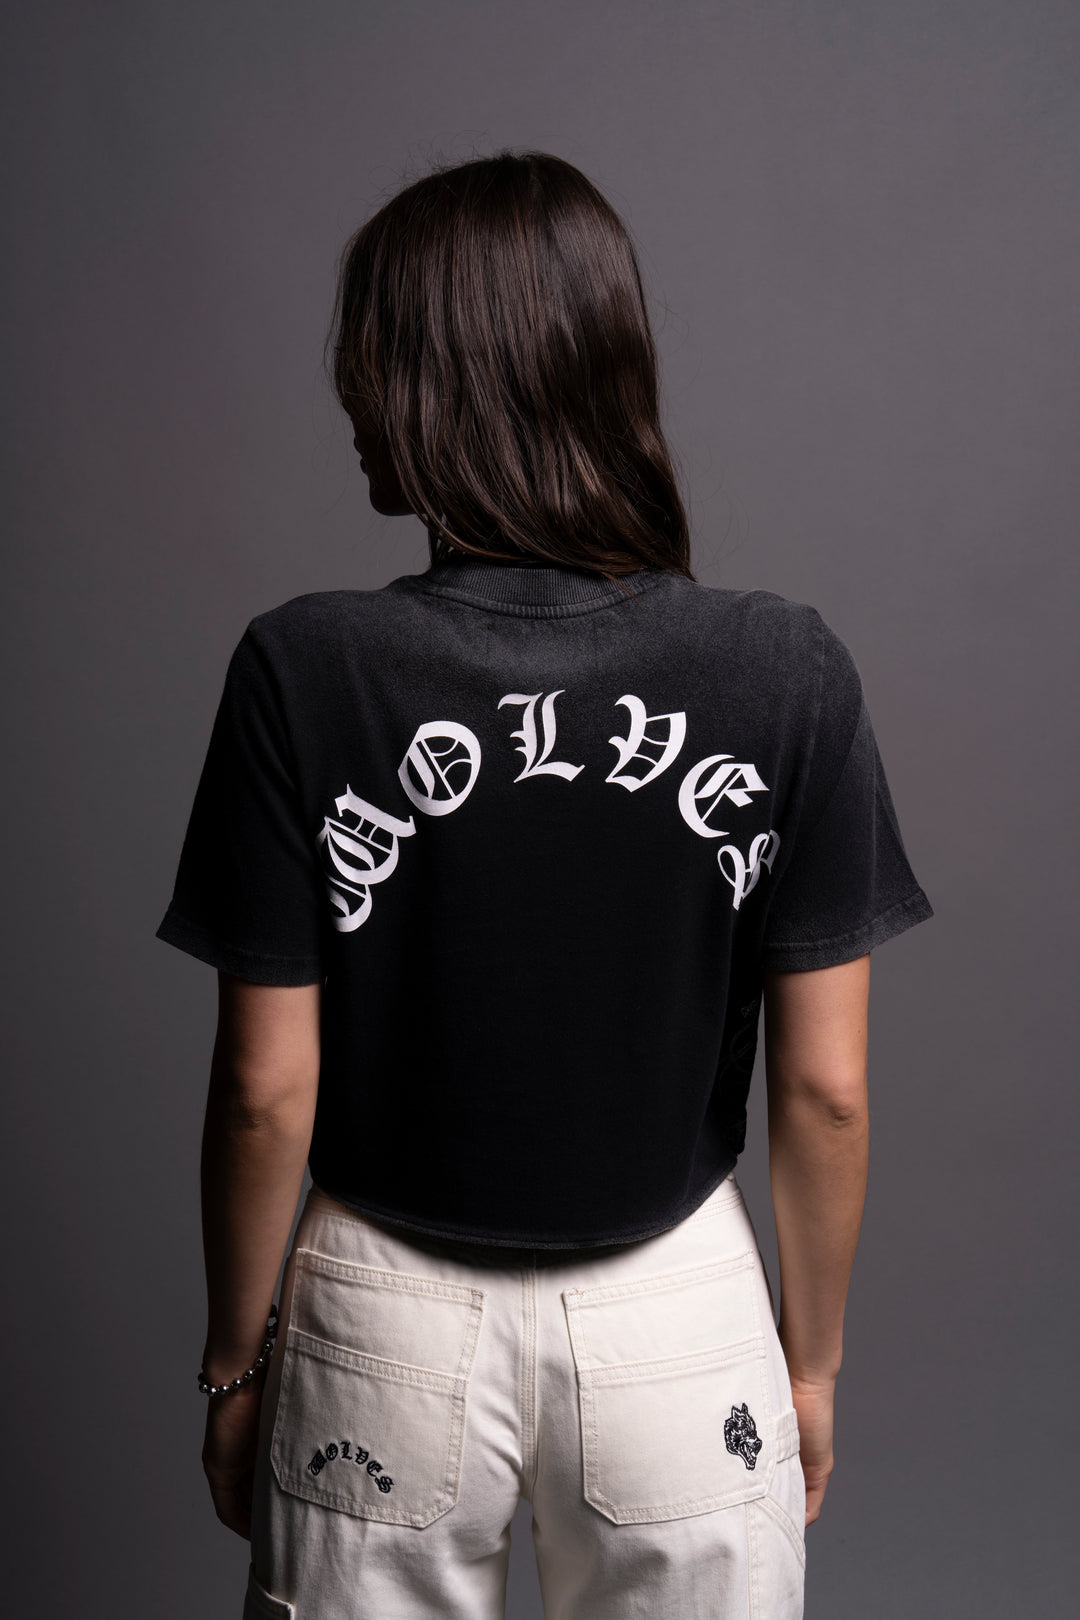 Our Wish "Premium" (Cropped) Tee in Black